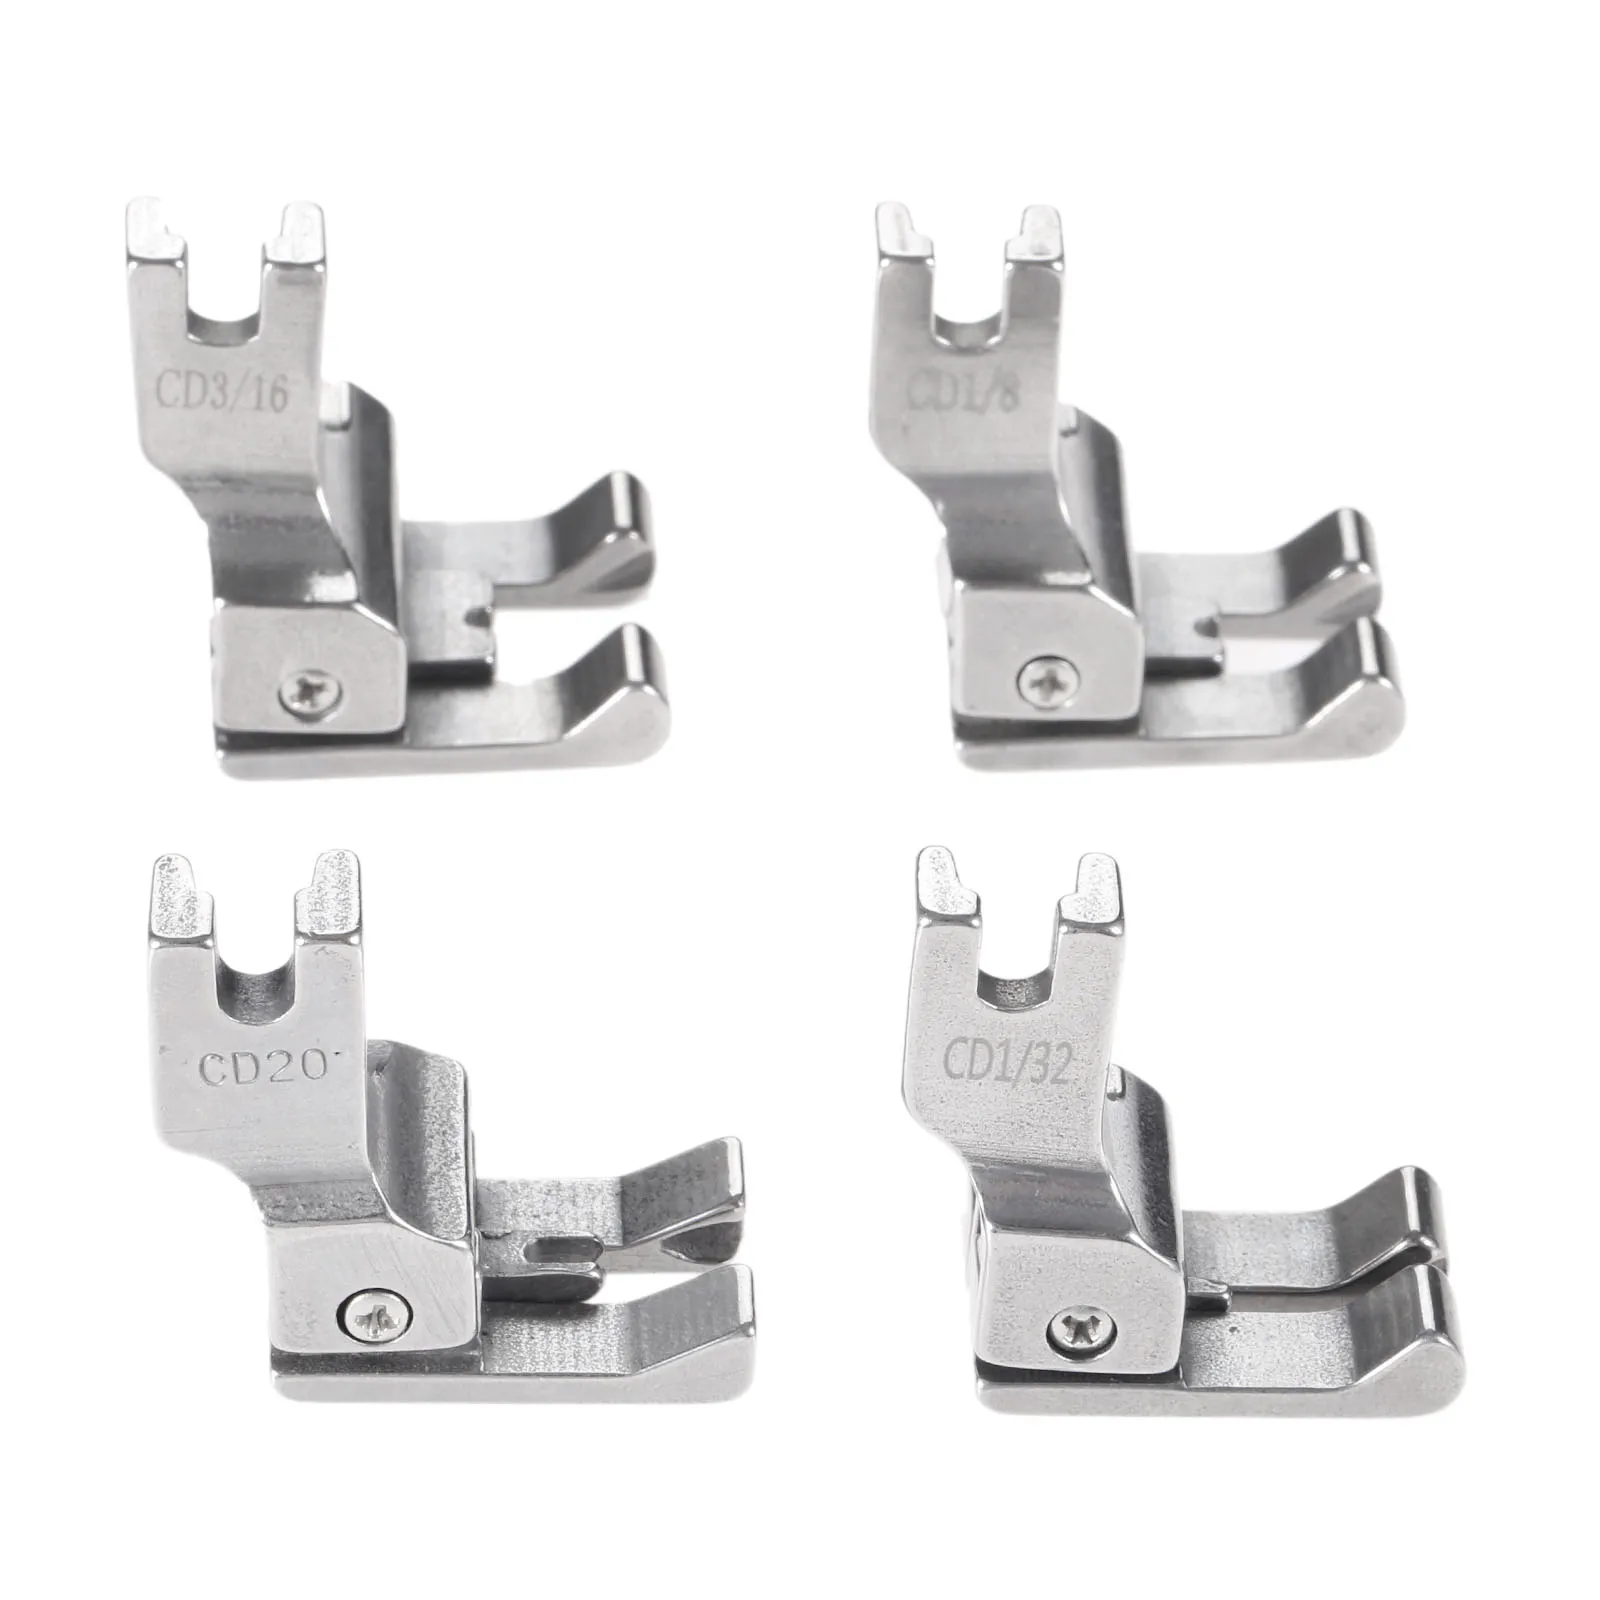 1pc Double Compensating Presser Foot Industrial Sewing Machine Steel Right&Left top stitching CD1/32 CD1/16 CD1/8 CD3/16 feet